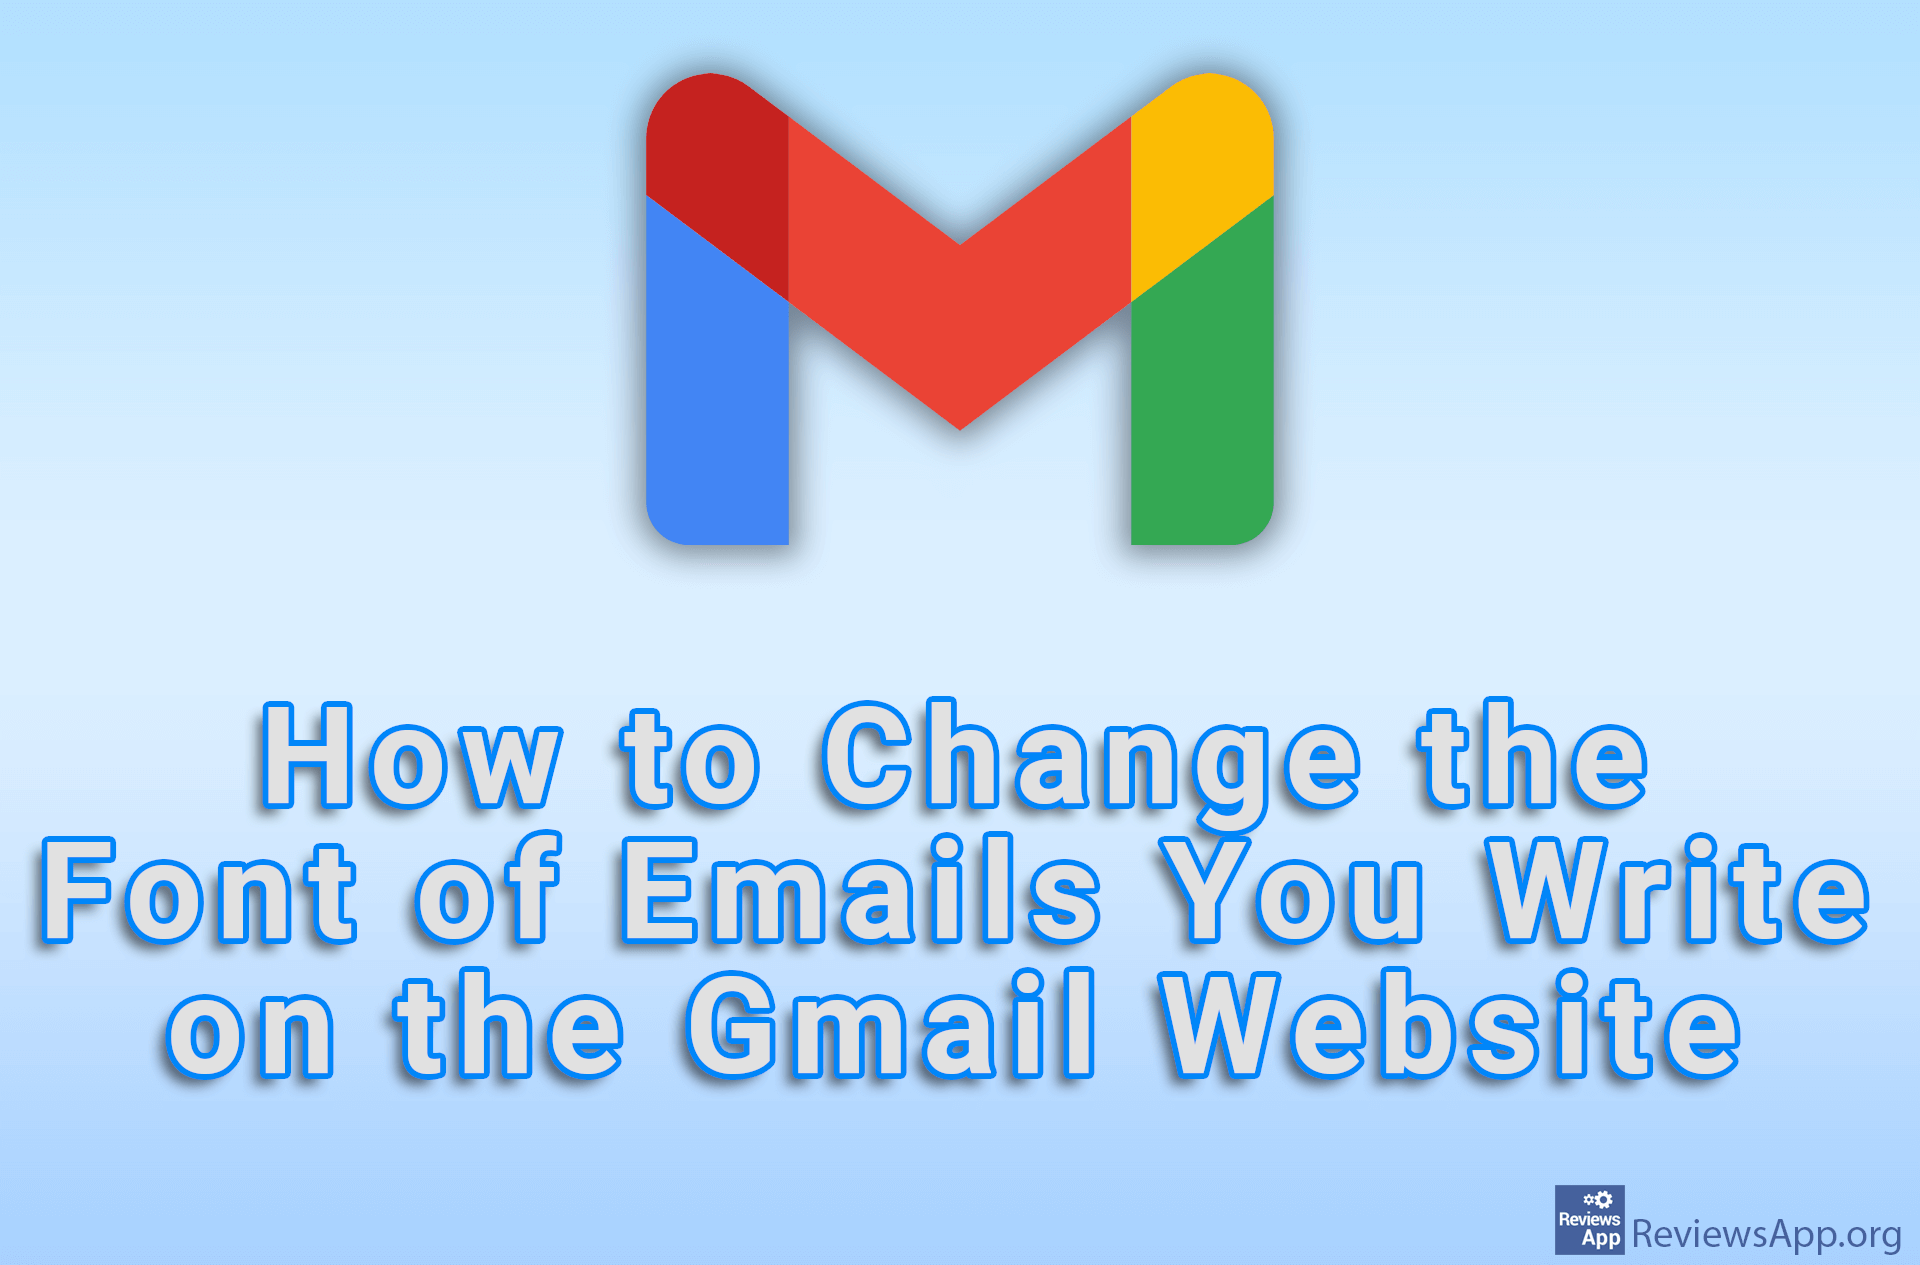 How to Change the Font of Emails You Write on the Gmail Website